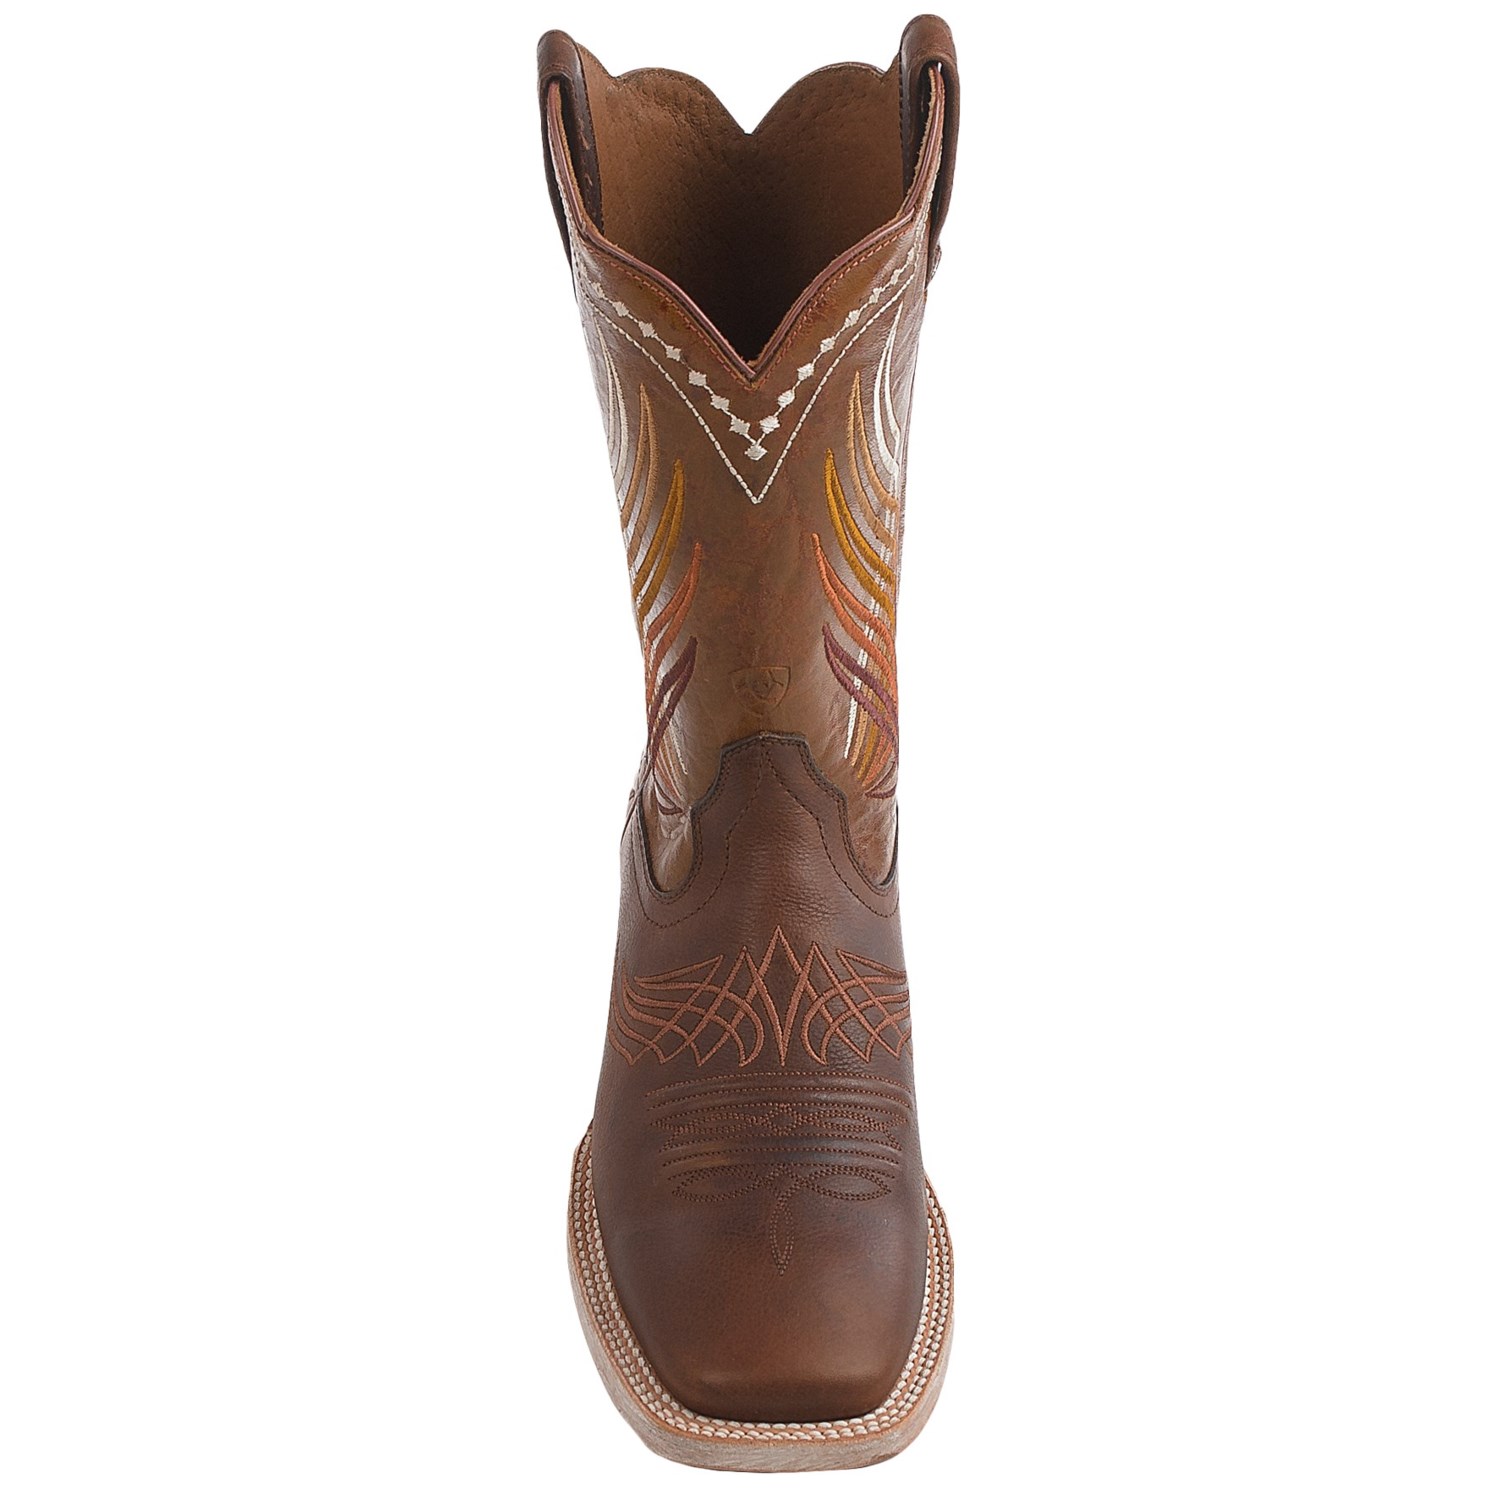 Ariat Mecate Cowboy Boots (For Men) - Save 55%